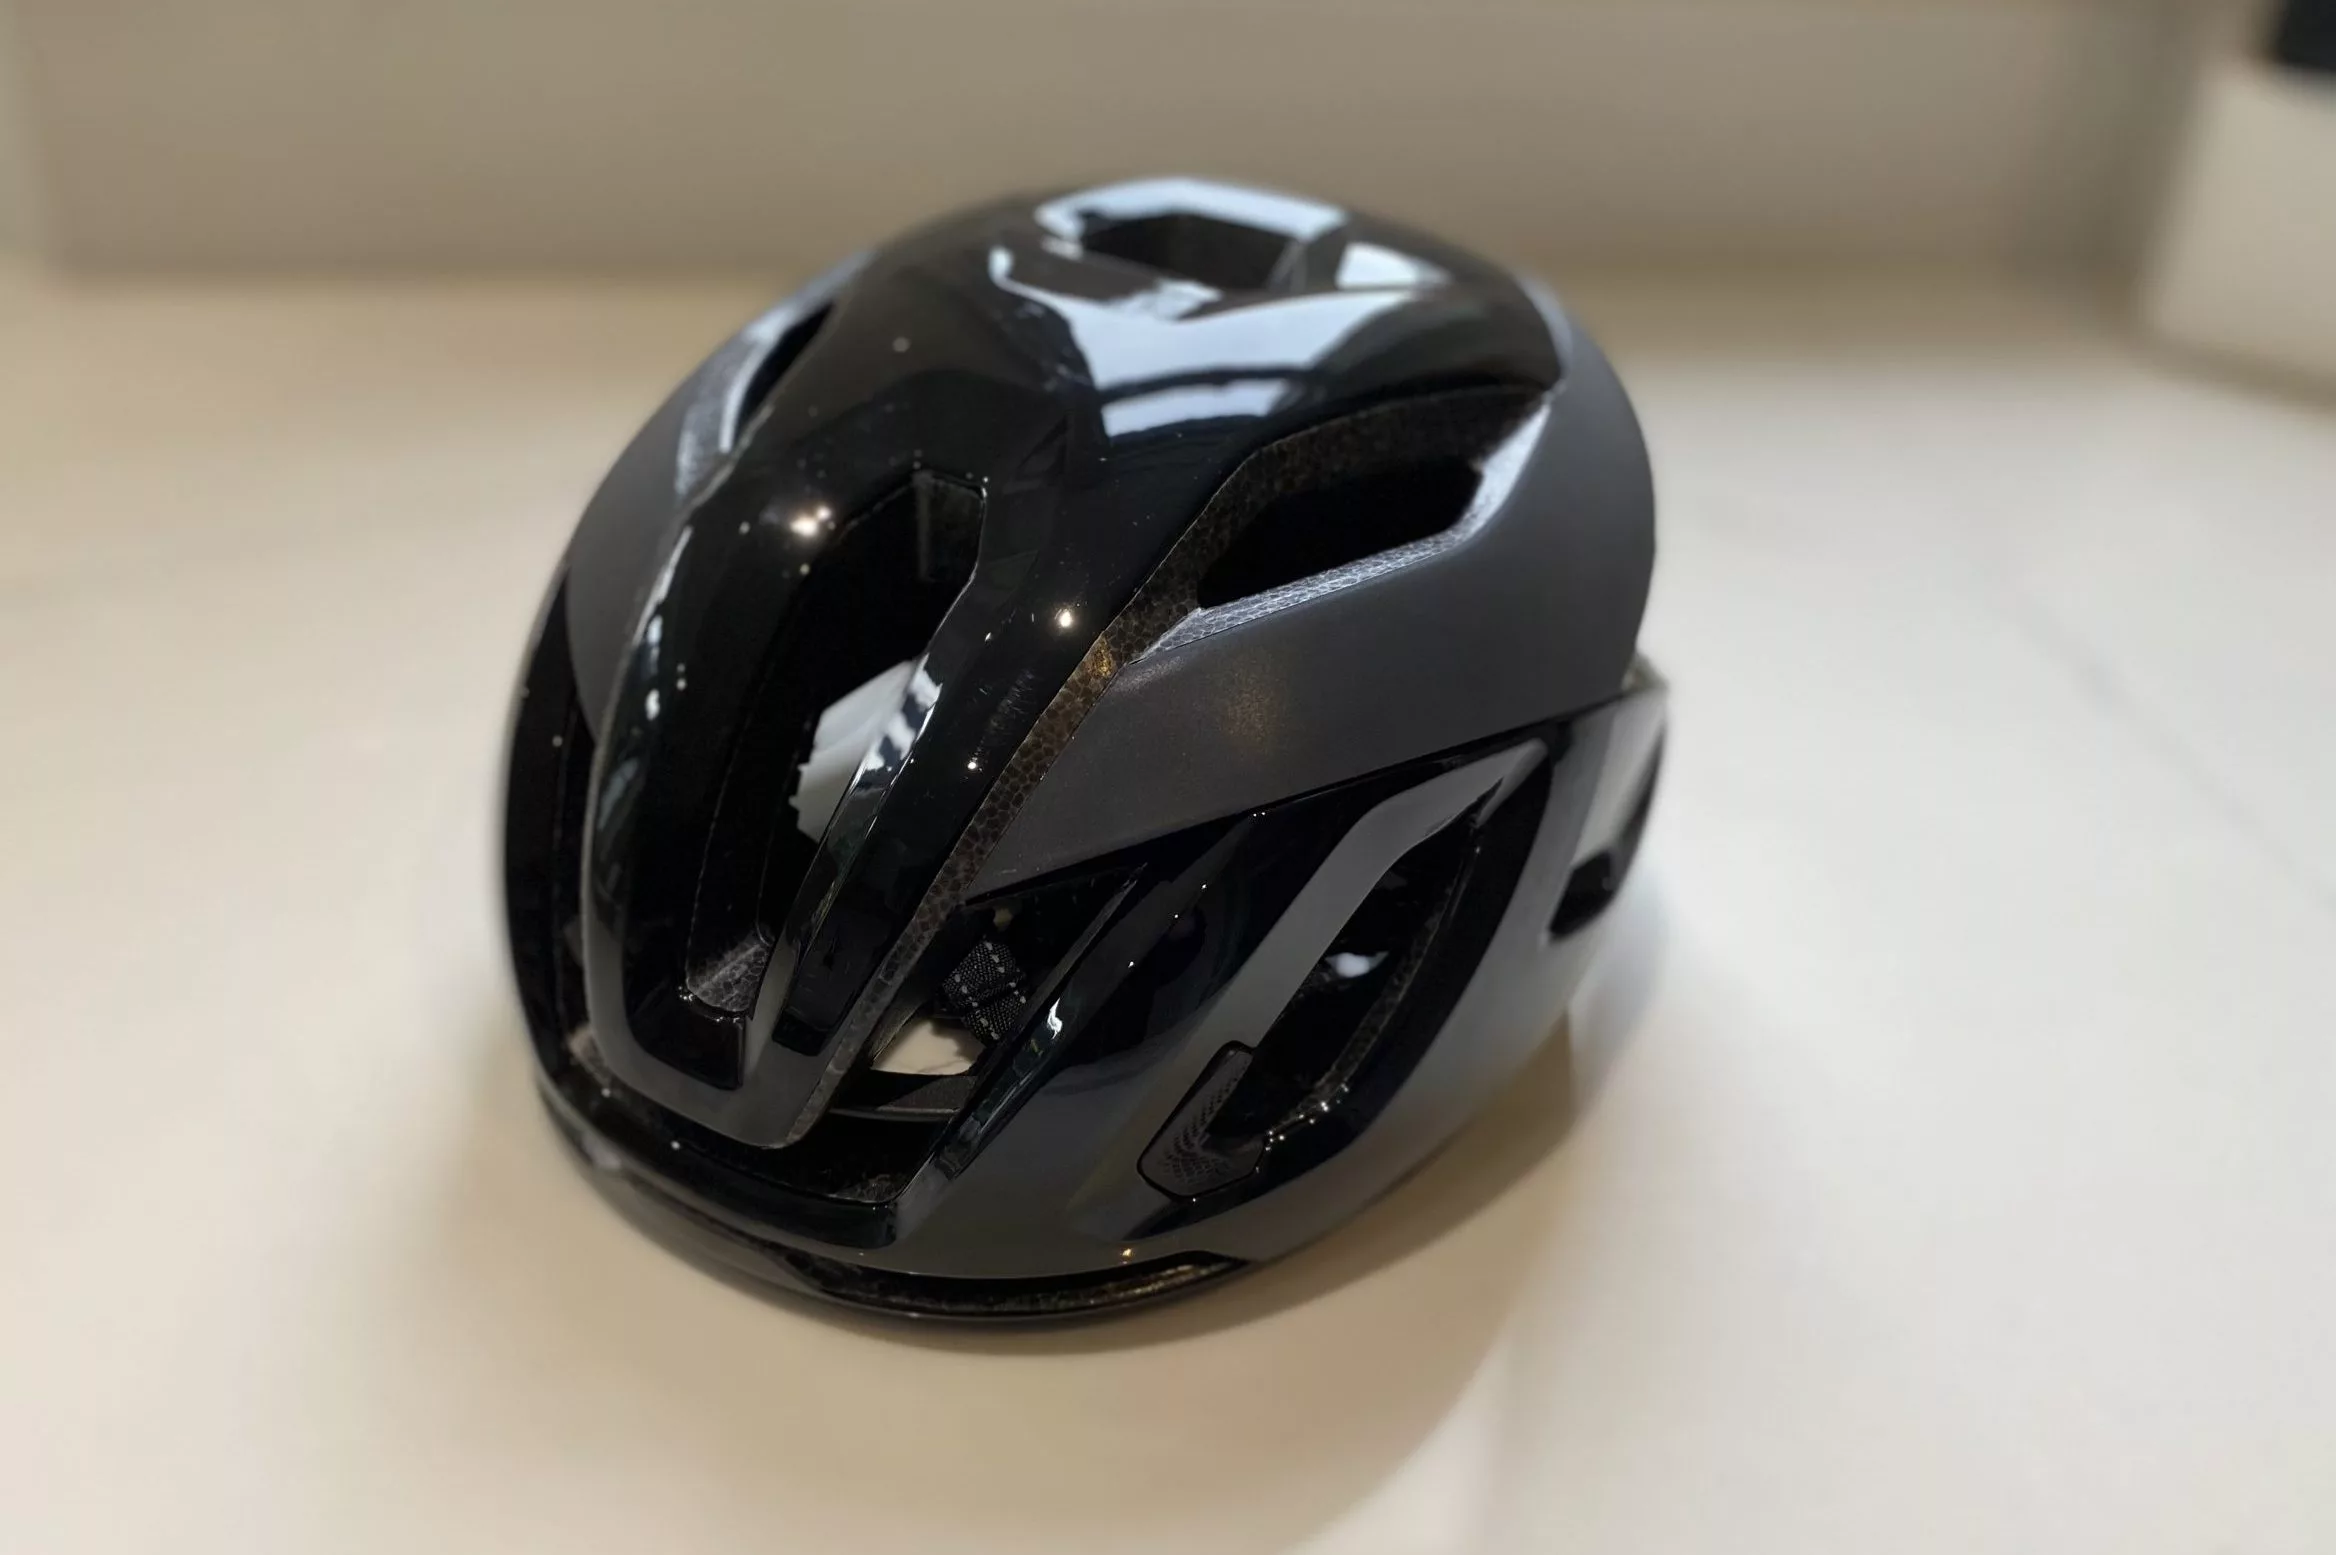 In the Drops: Oakley Aro5 helmet, Gore Windstopper cap, Spurcycle bell, Lead Out bag and Do Nothing